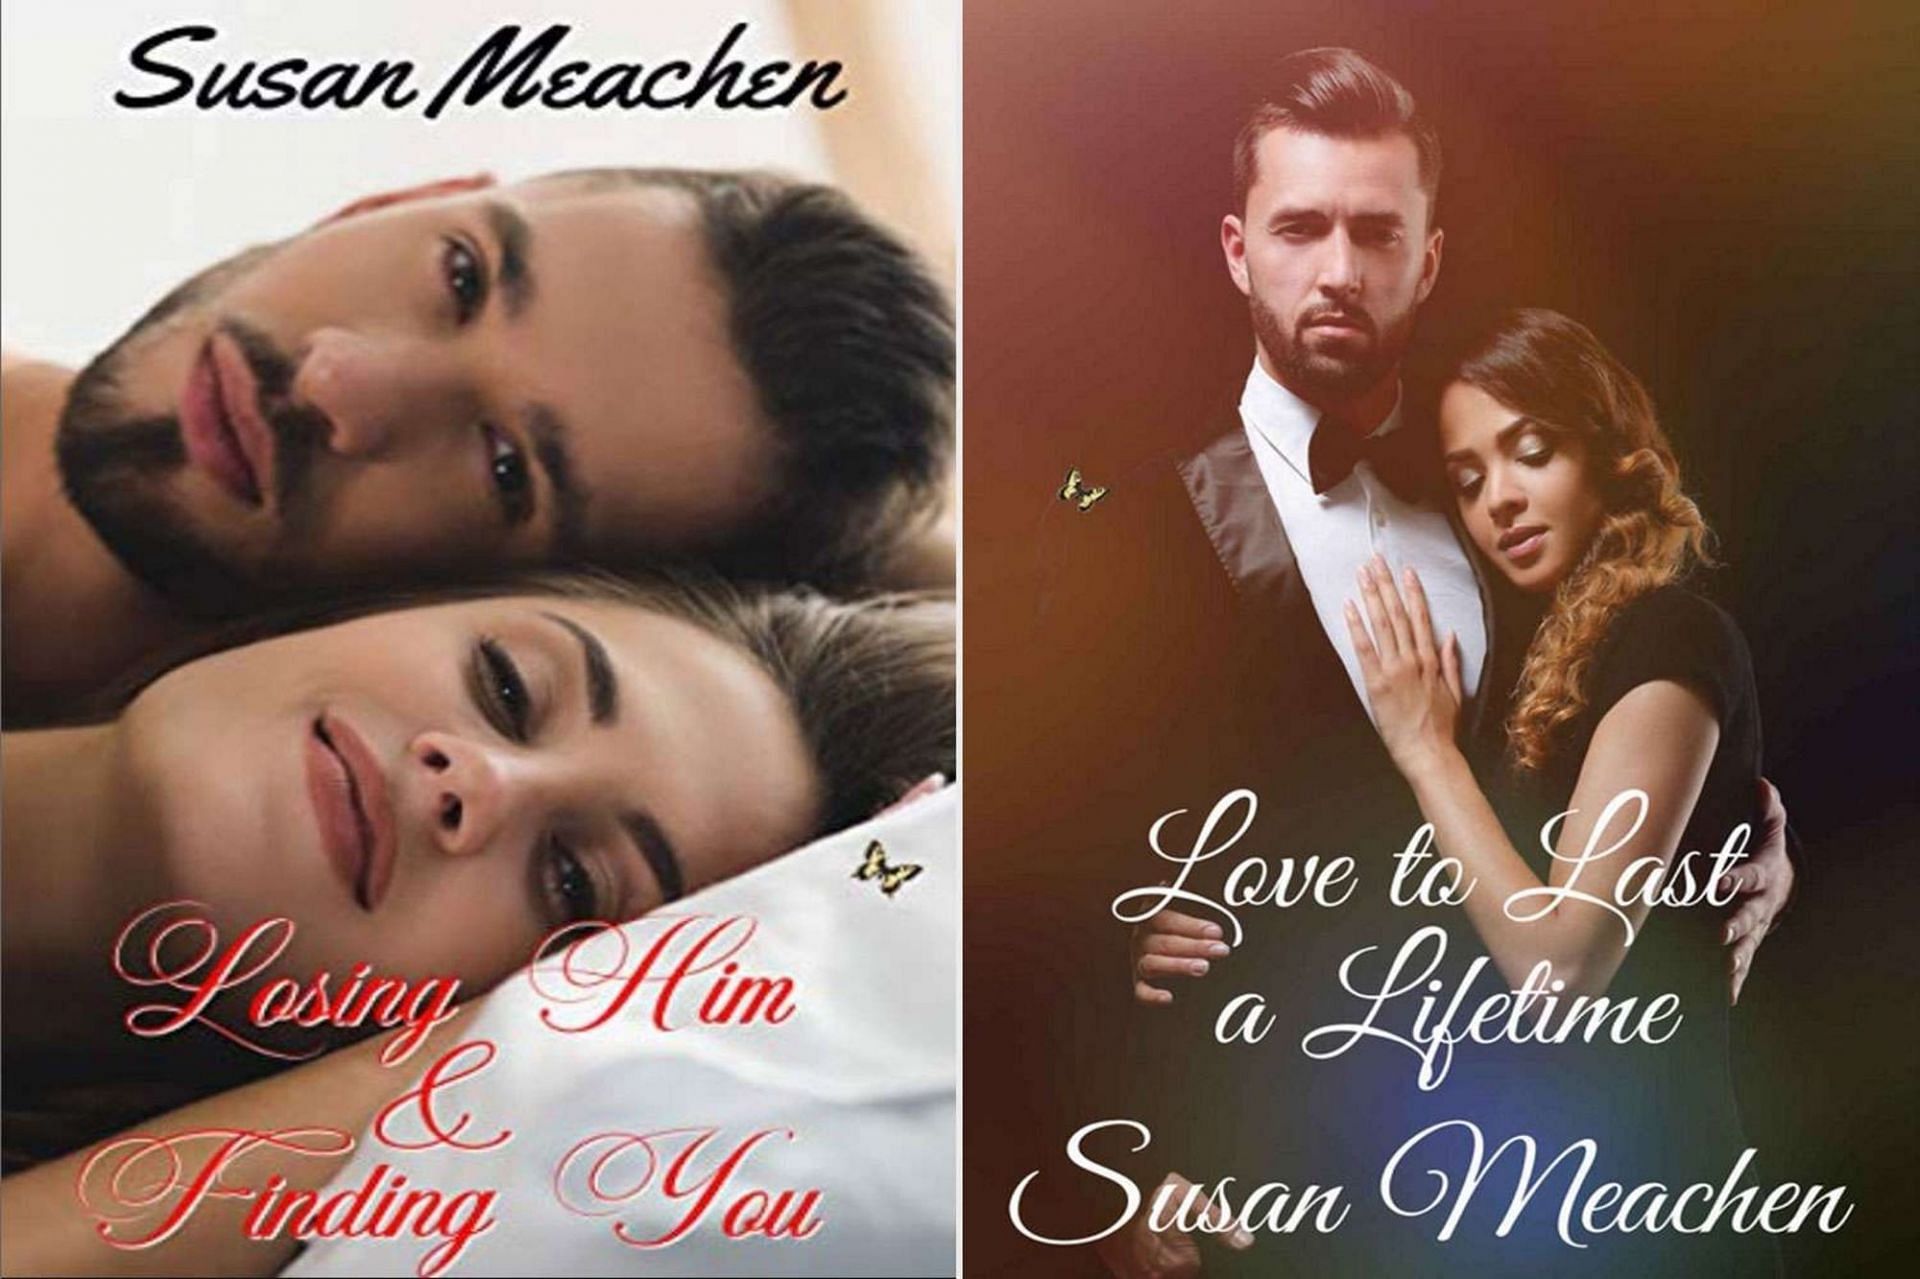 Author Susan Meachen accused of faking her own suicide (Images via Amazon)